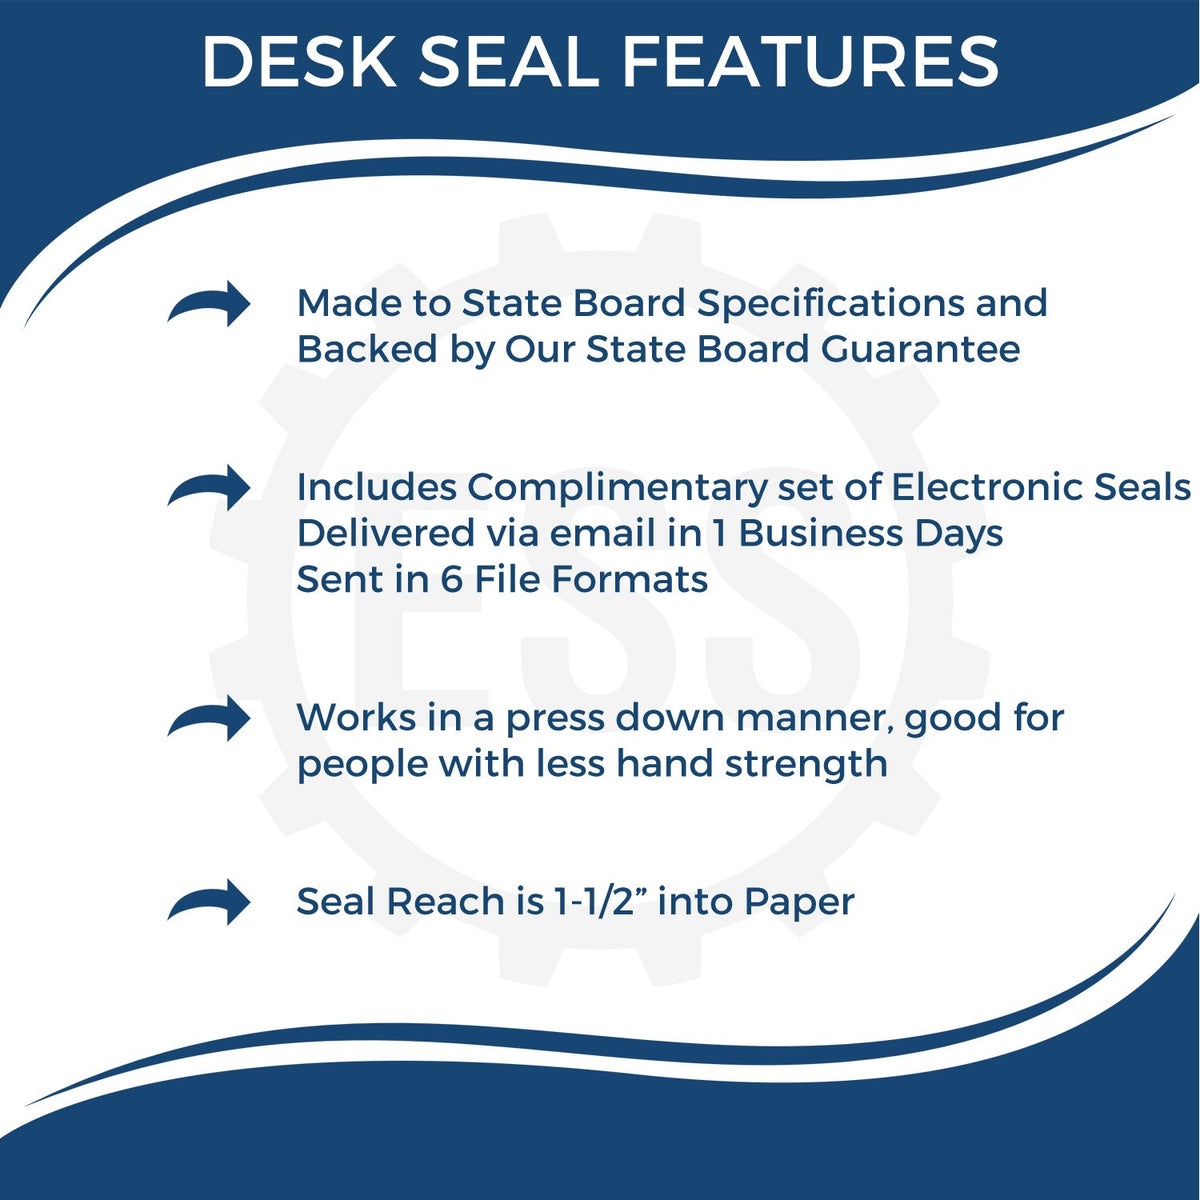 A picture of an infographic highlighting the selling points for the Maine Engineer Desk Seal